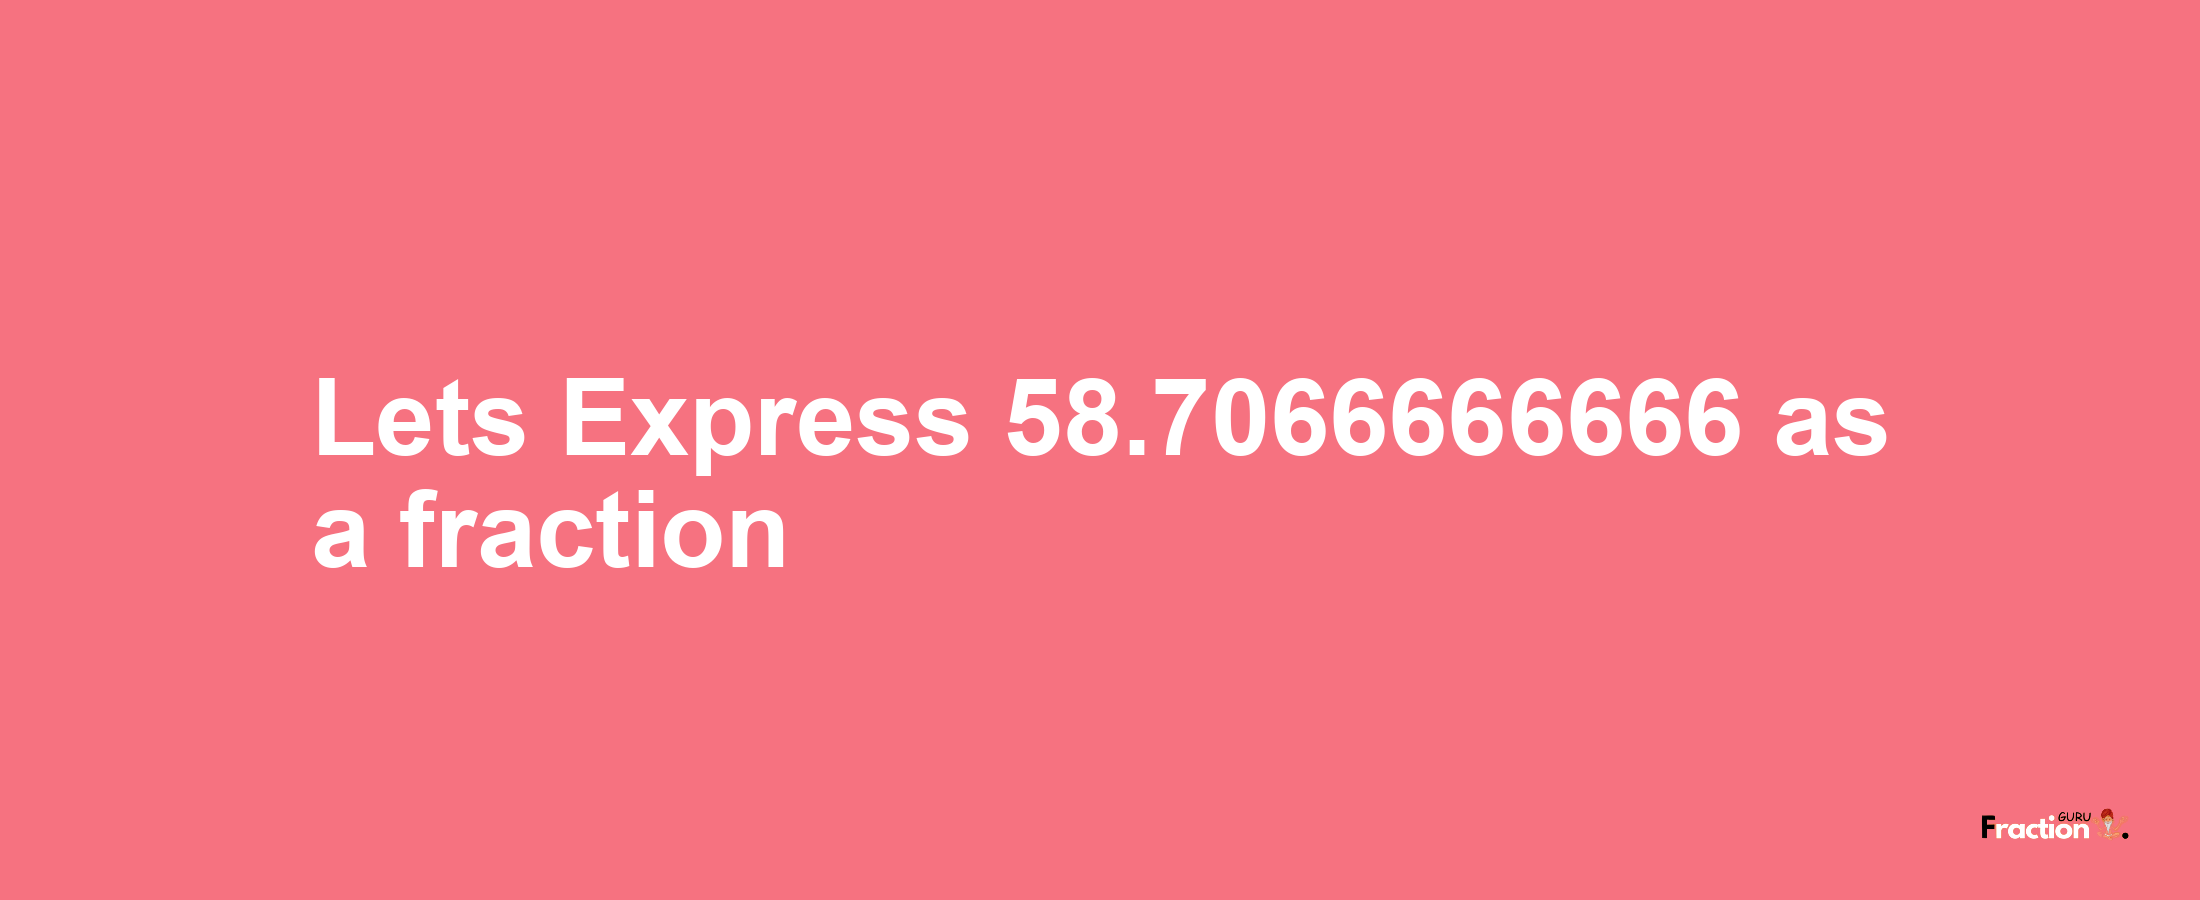 Lets Express 58.7066666666 as afraction